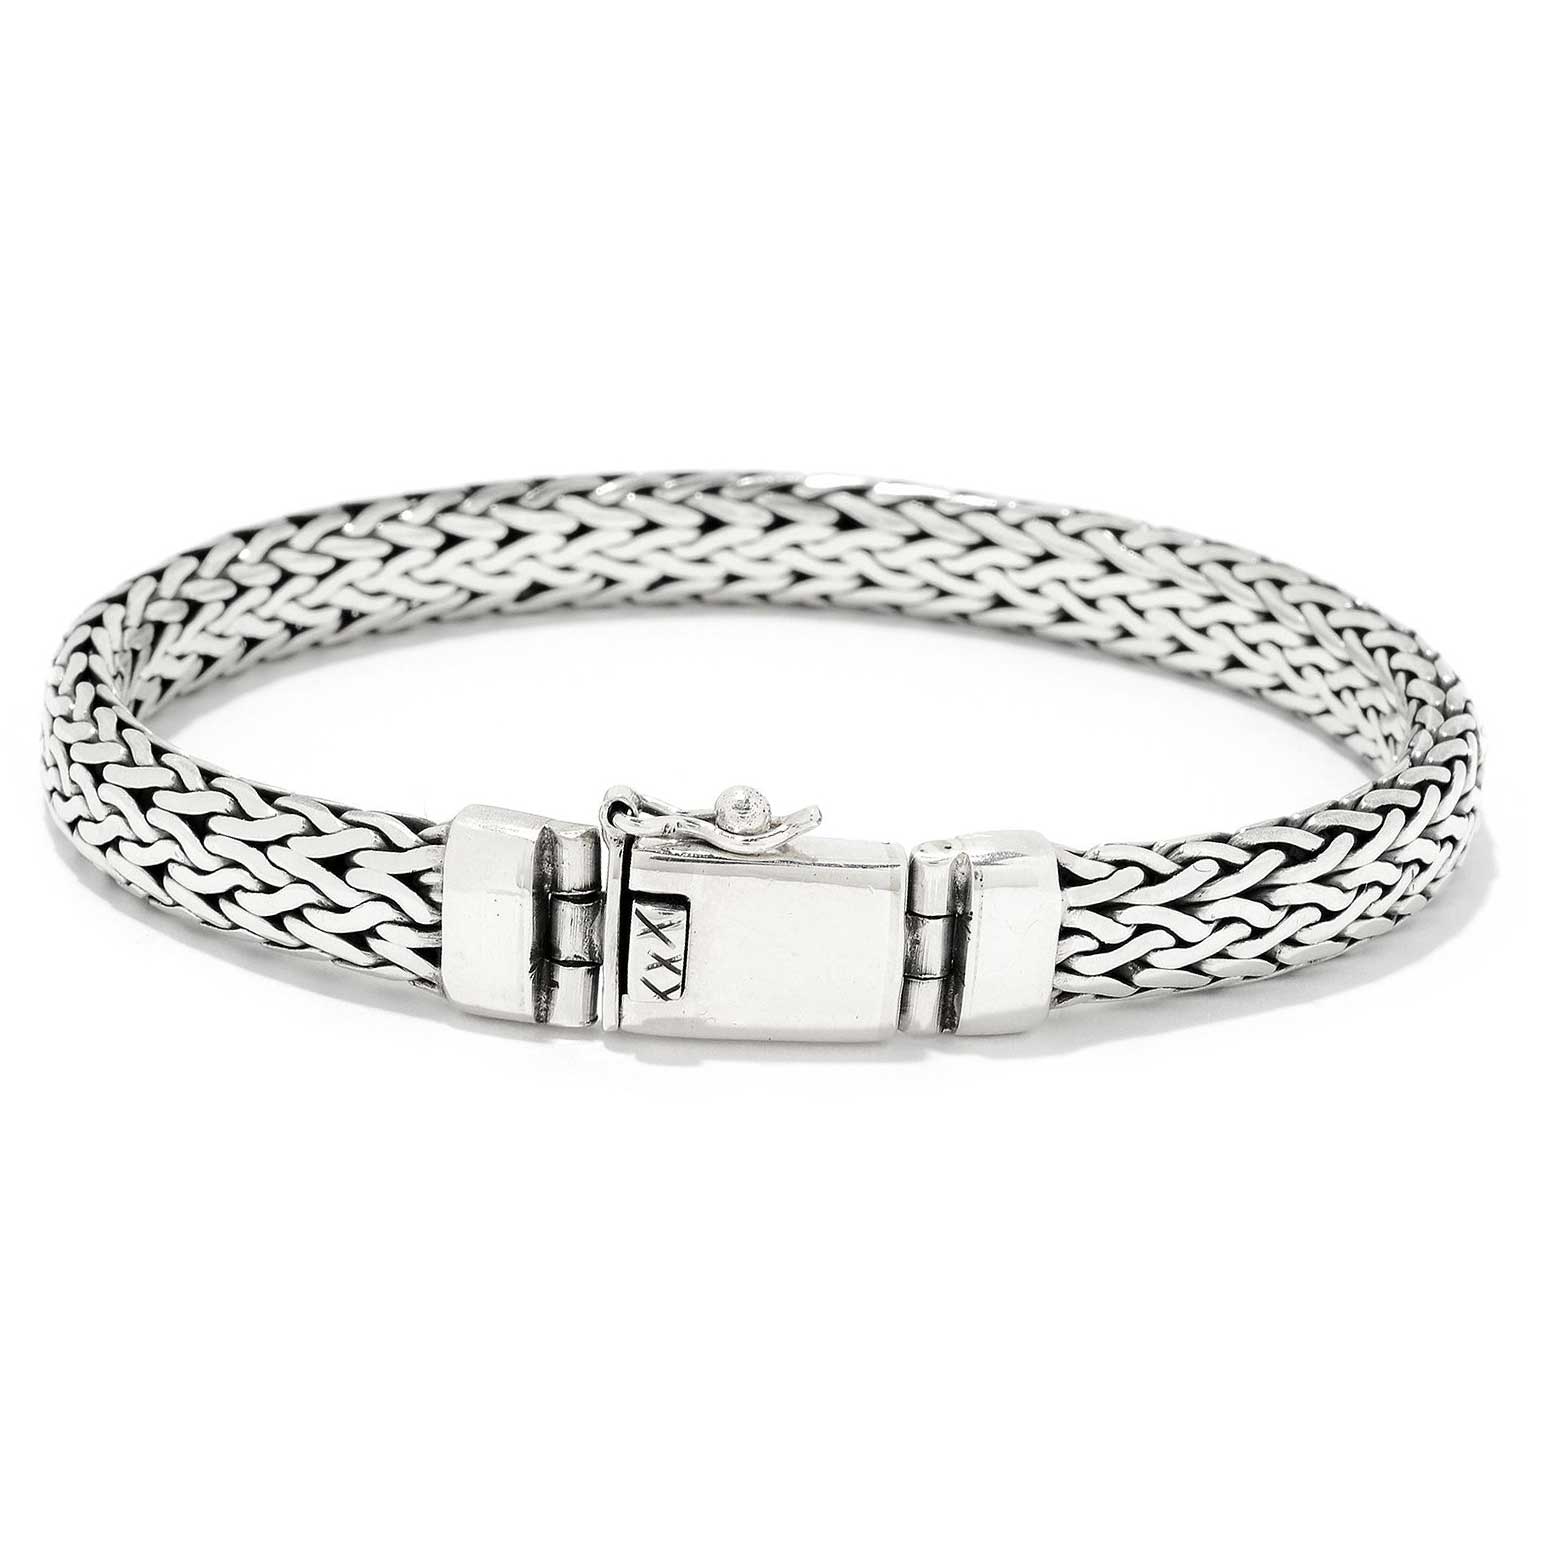 Braided Bali Men's Bracelet, 8.50 inches, Sterling Silver | Silver ...